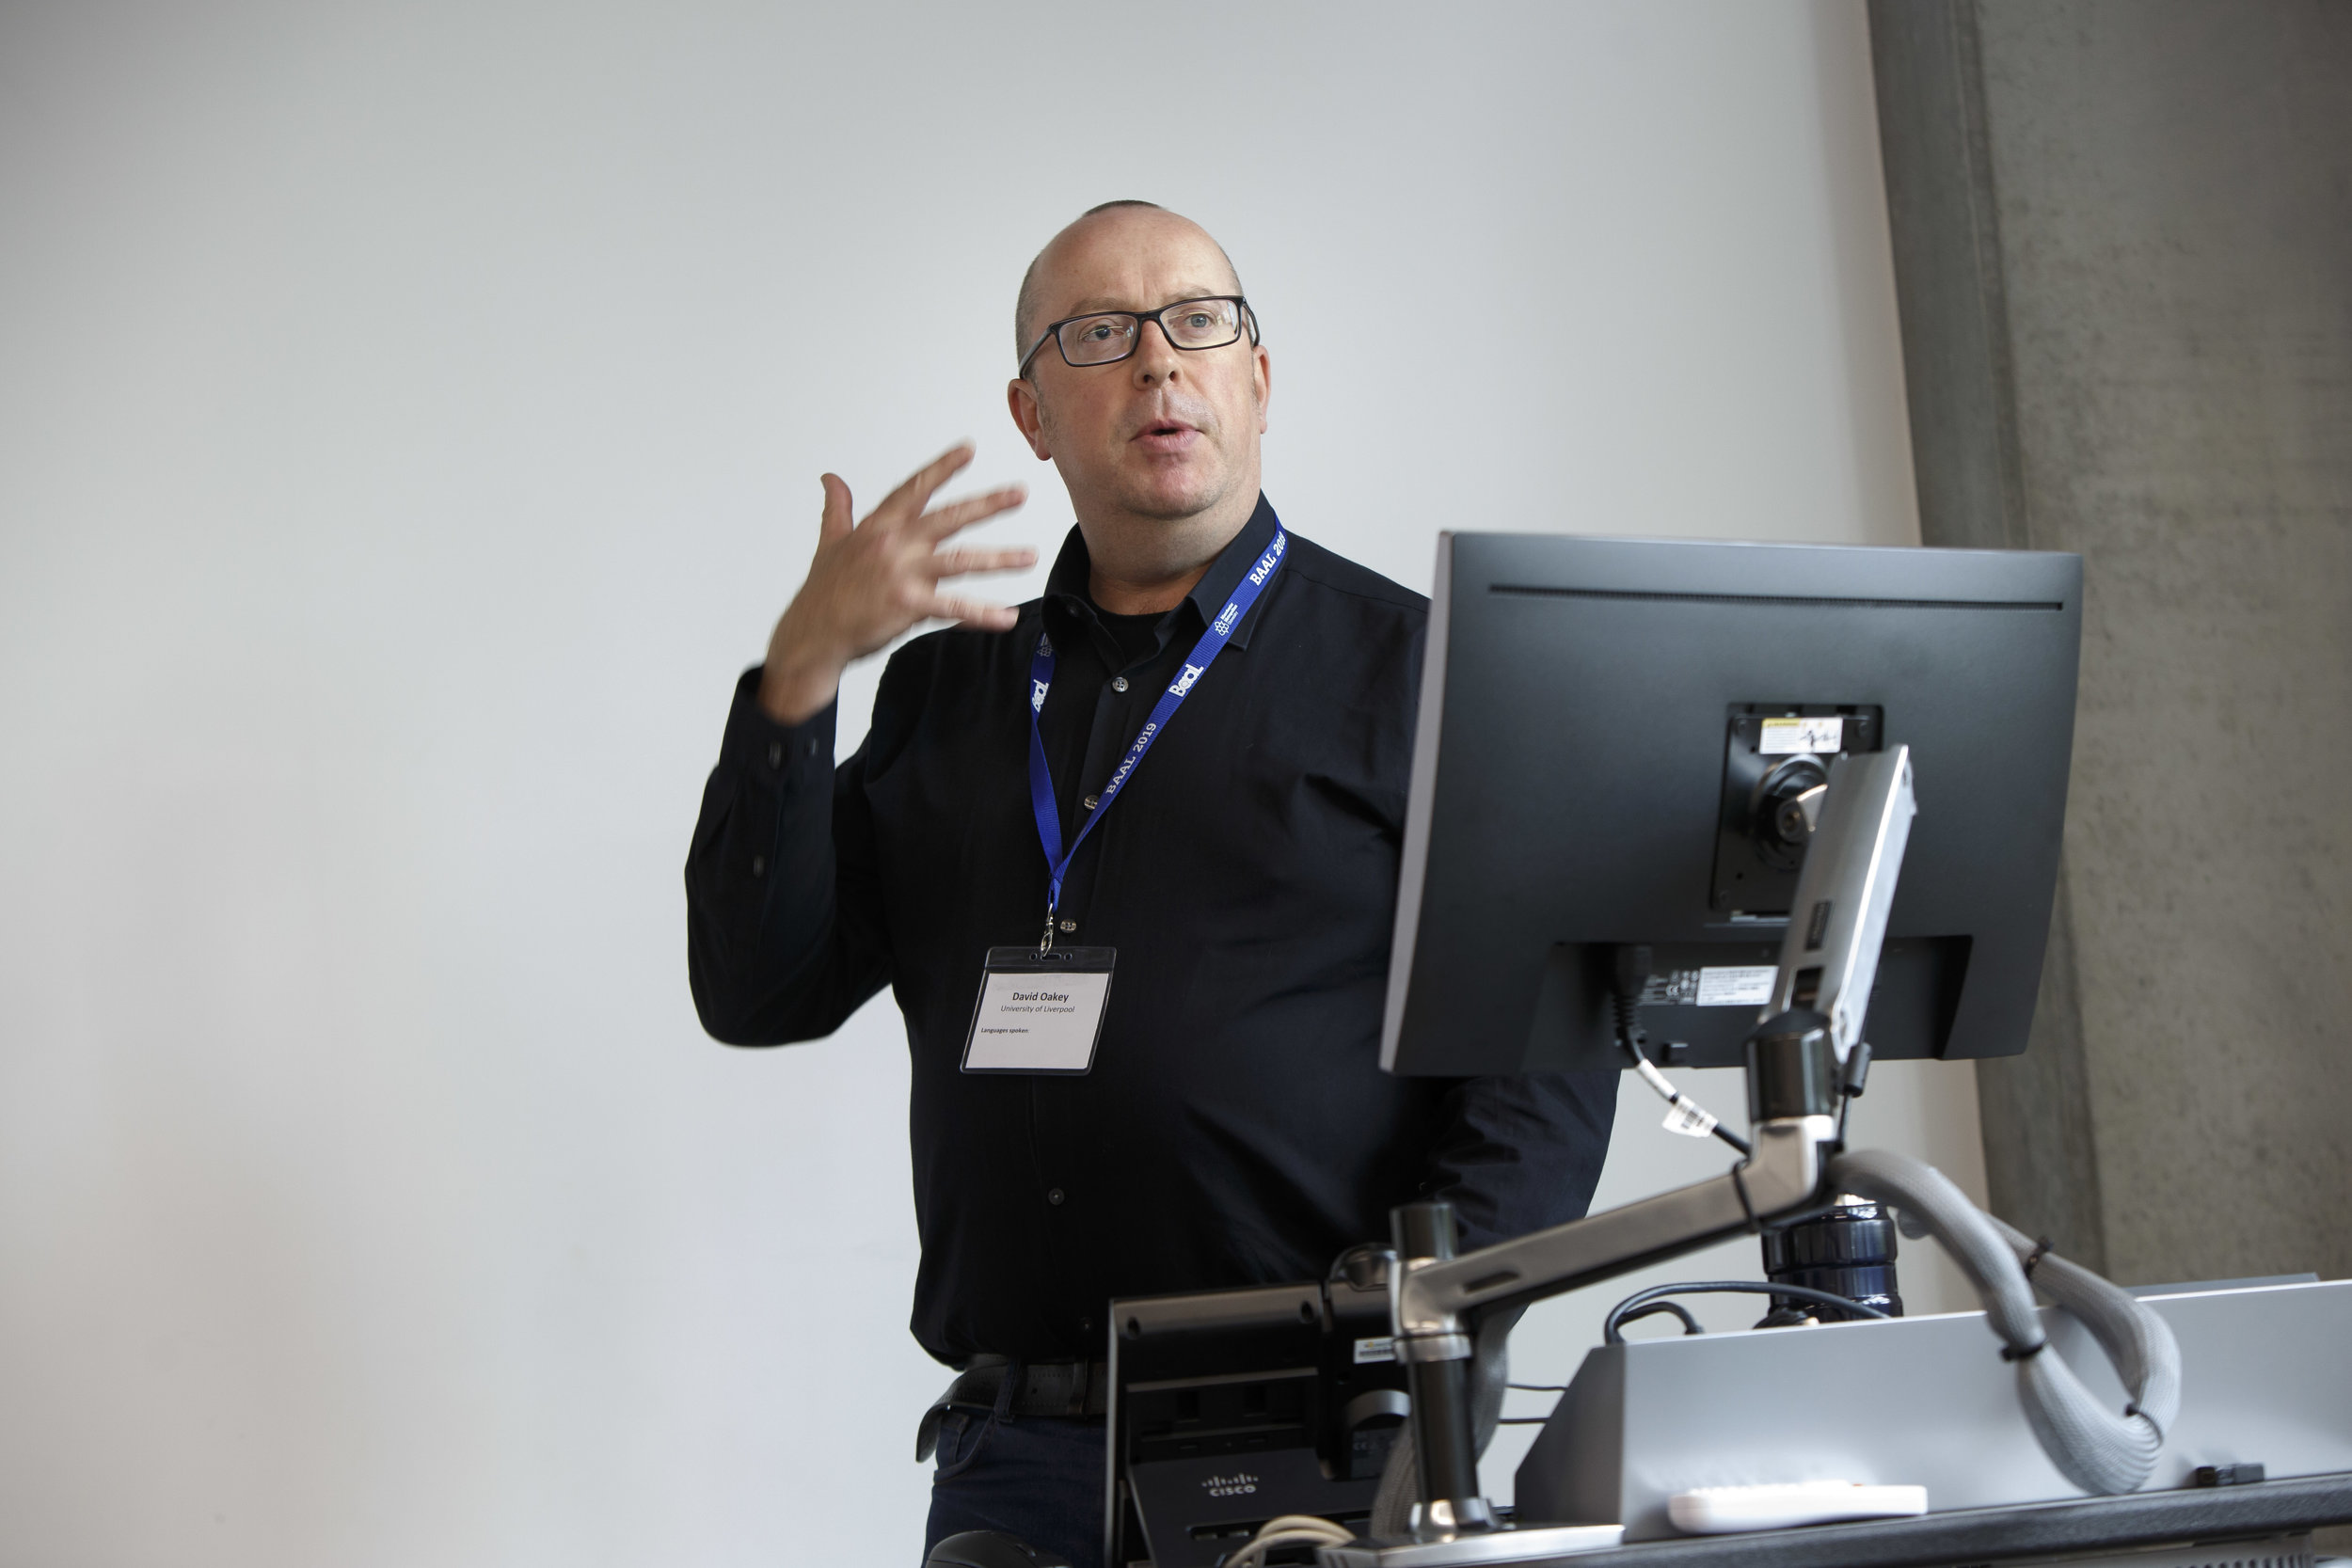  Photograph taken at a University conference, Manchester 